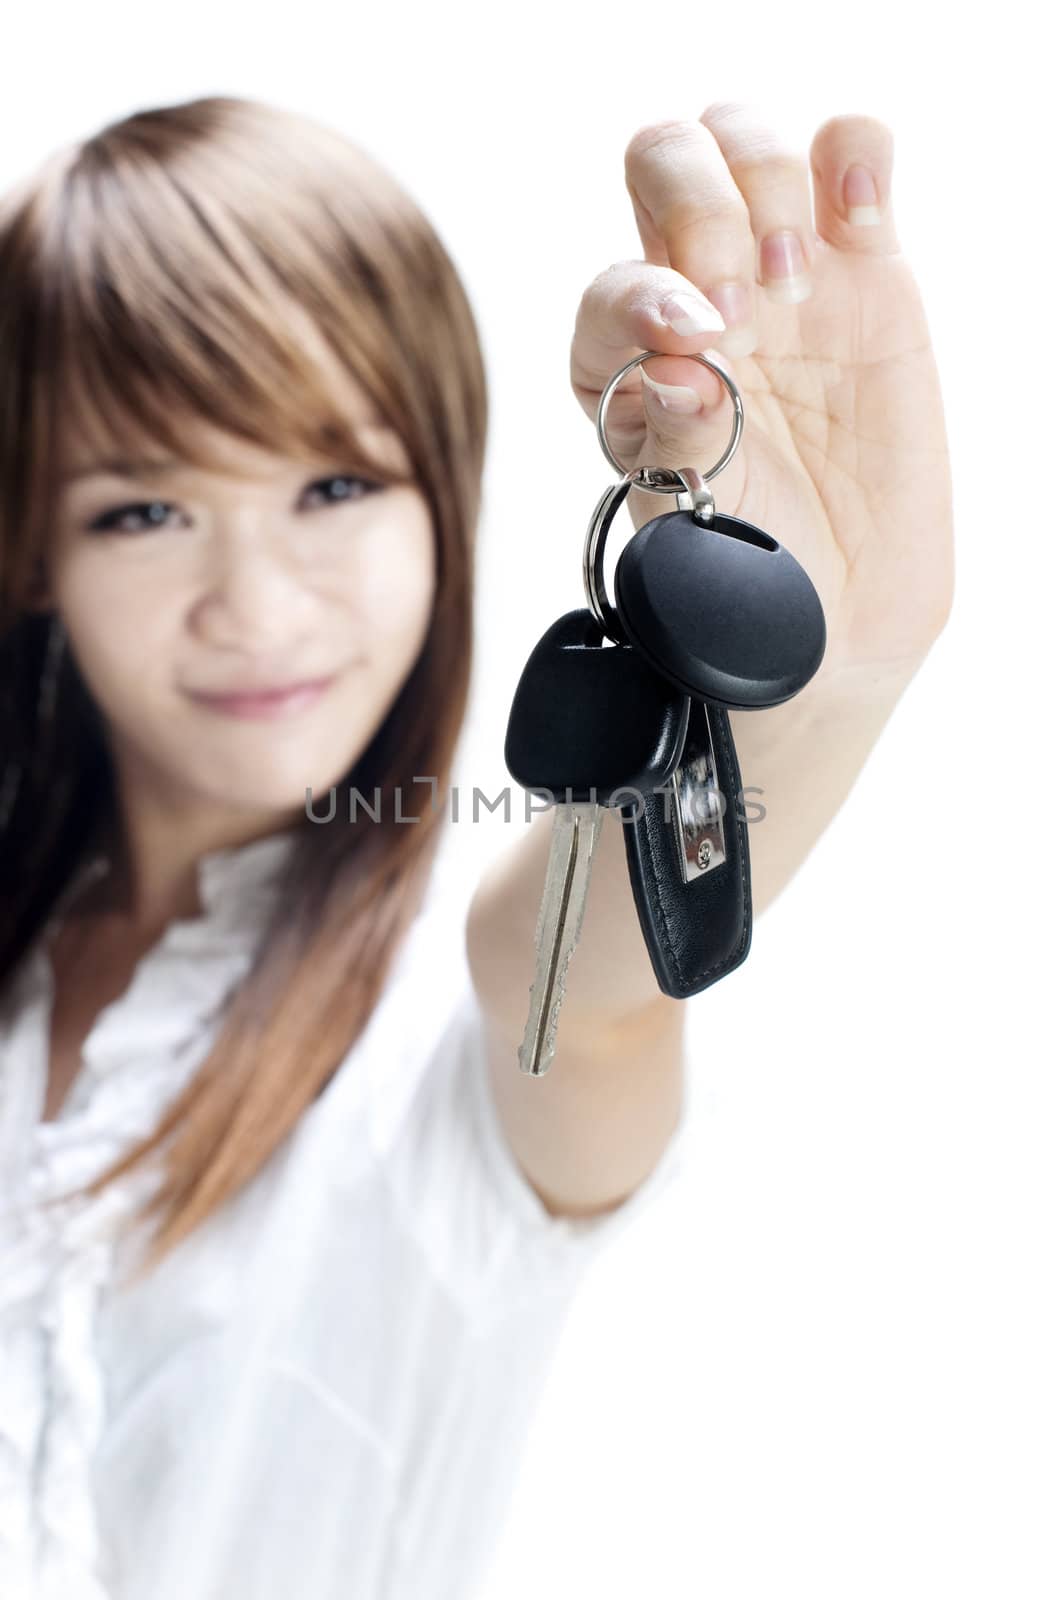 Young woman holding her first own car key on white background, focus on car key.